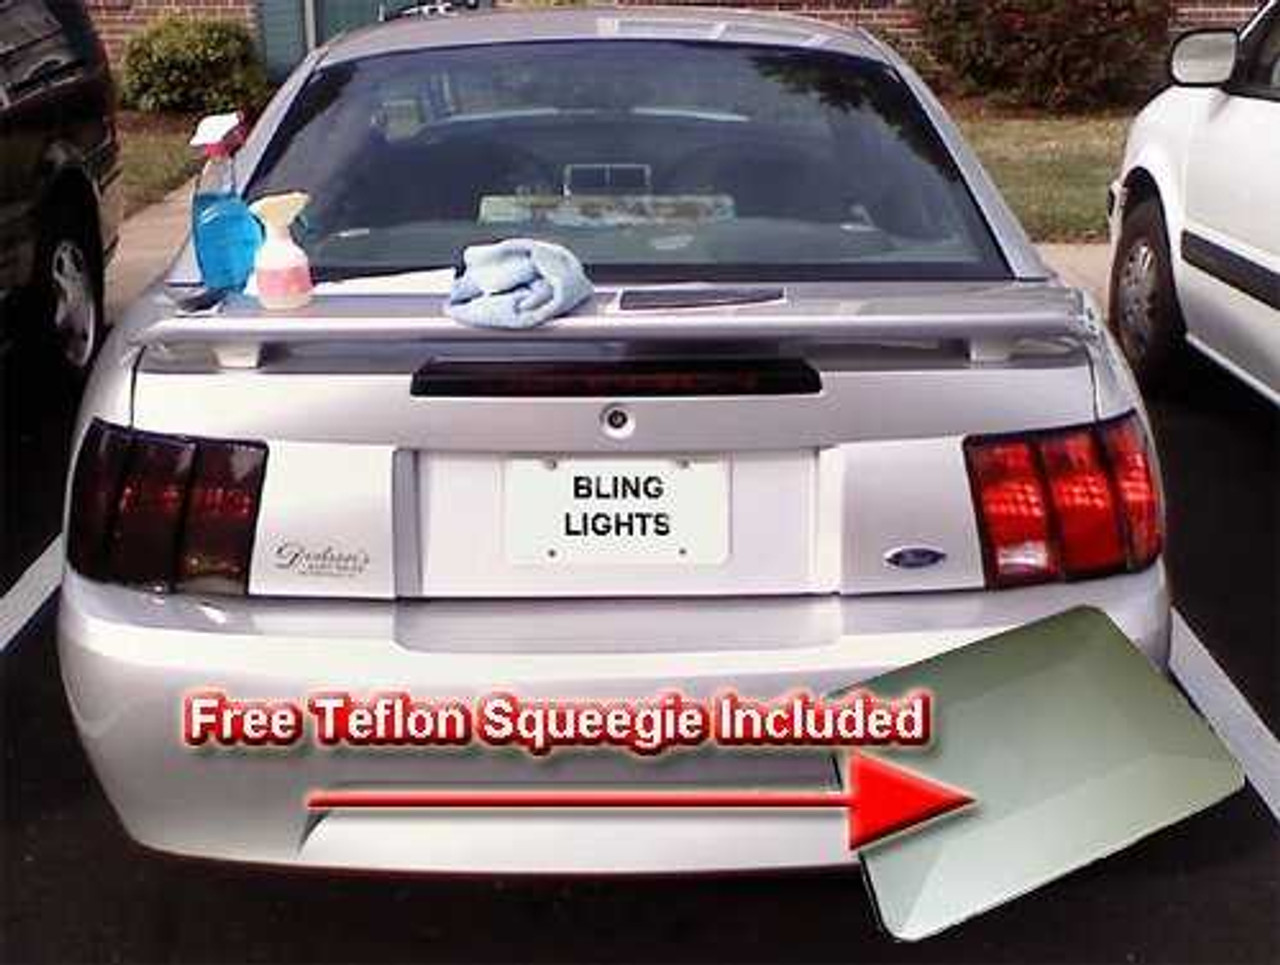 BlingLights Brand Tinted Taillight Protective Film Overlays for Ford Fusion